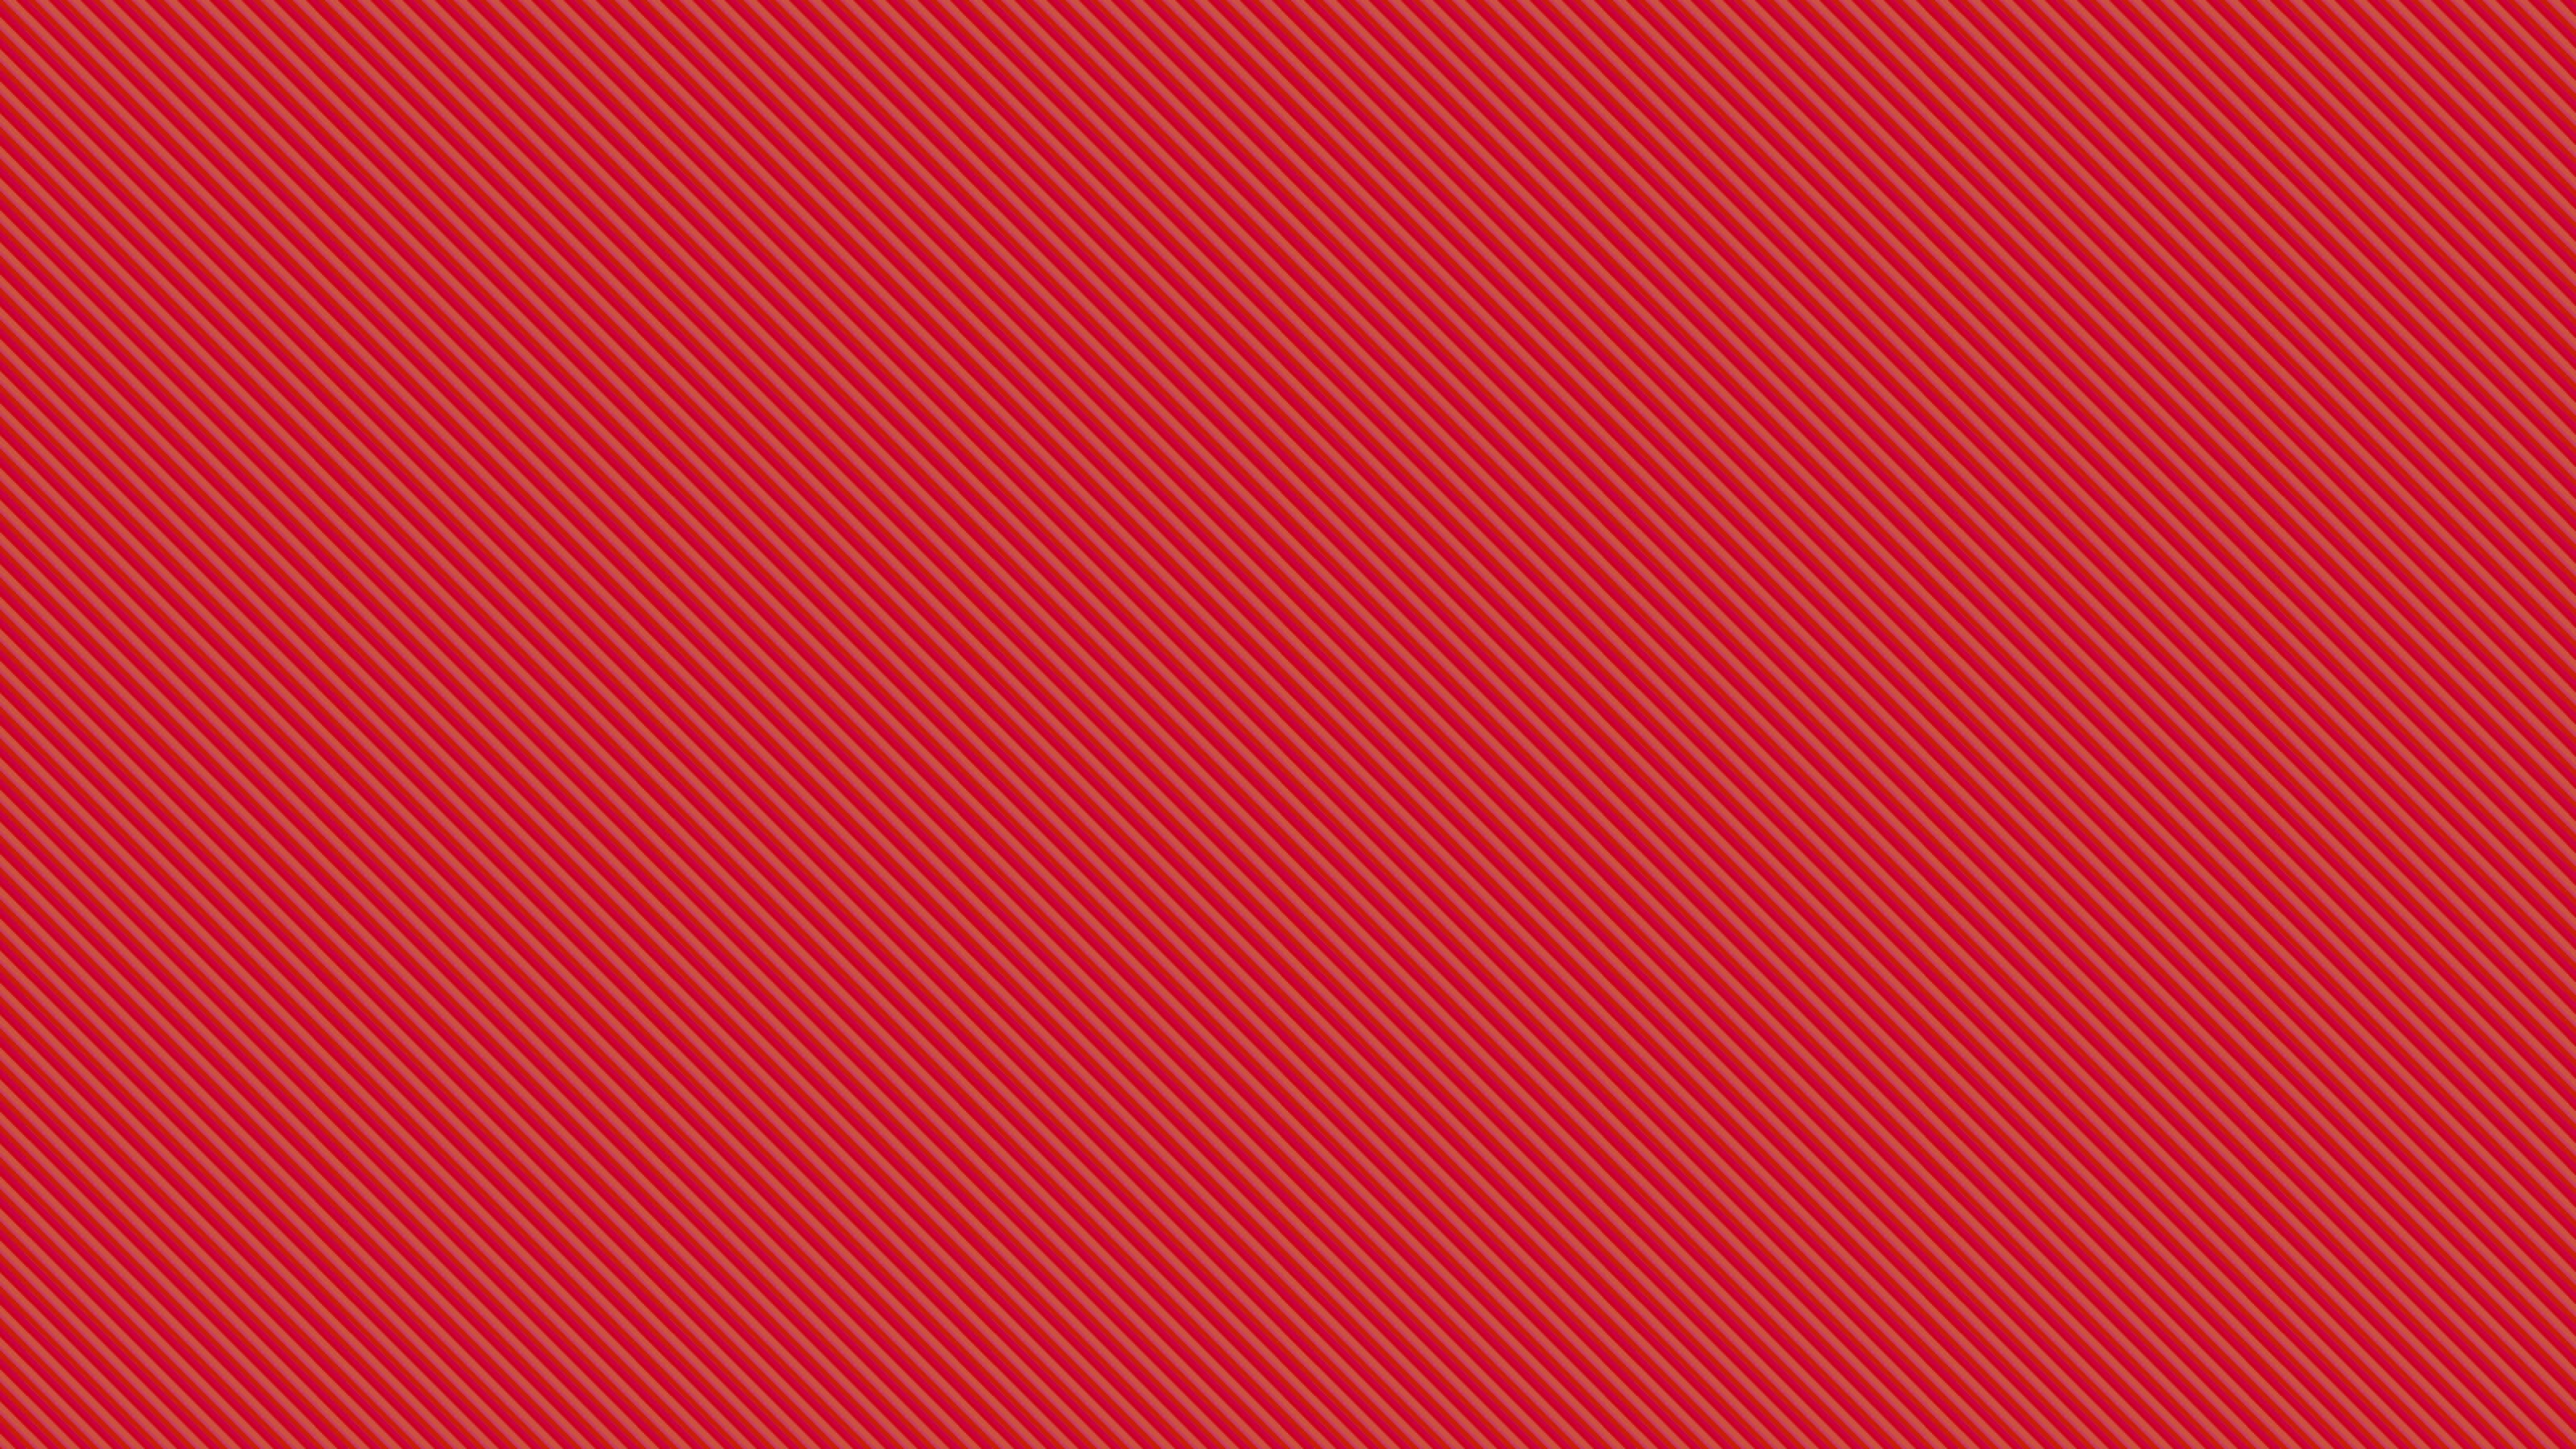 Textile Rayé Rouge et Blanc. Wallpaper in 3840x2160 Resolution